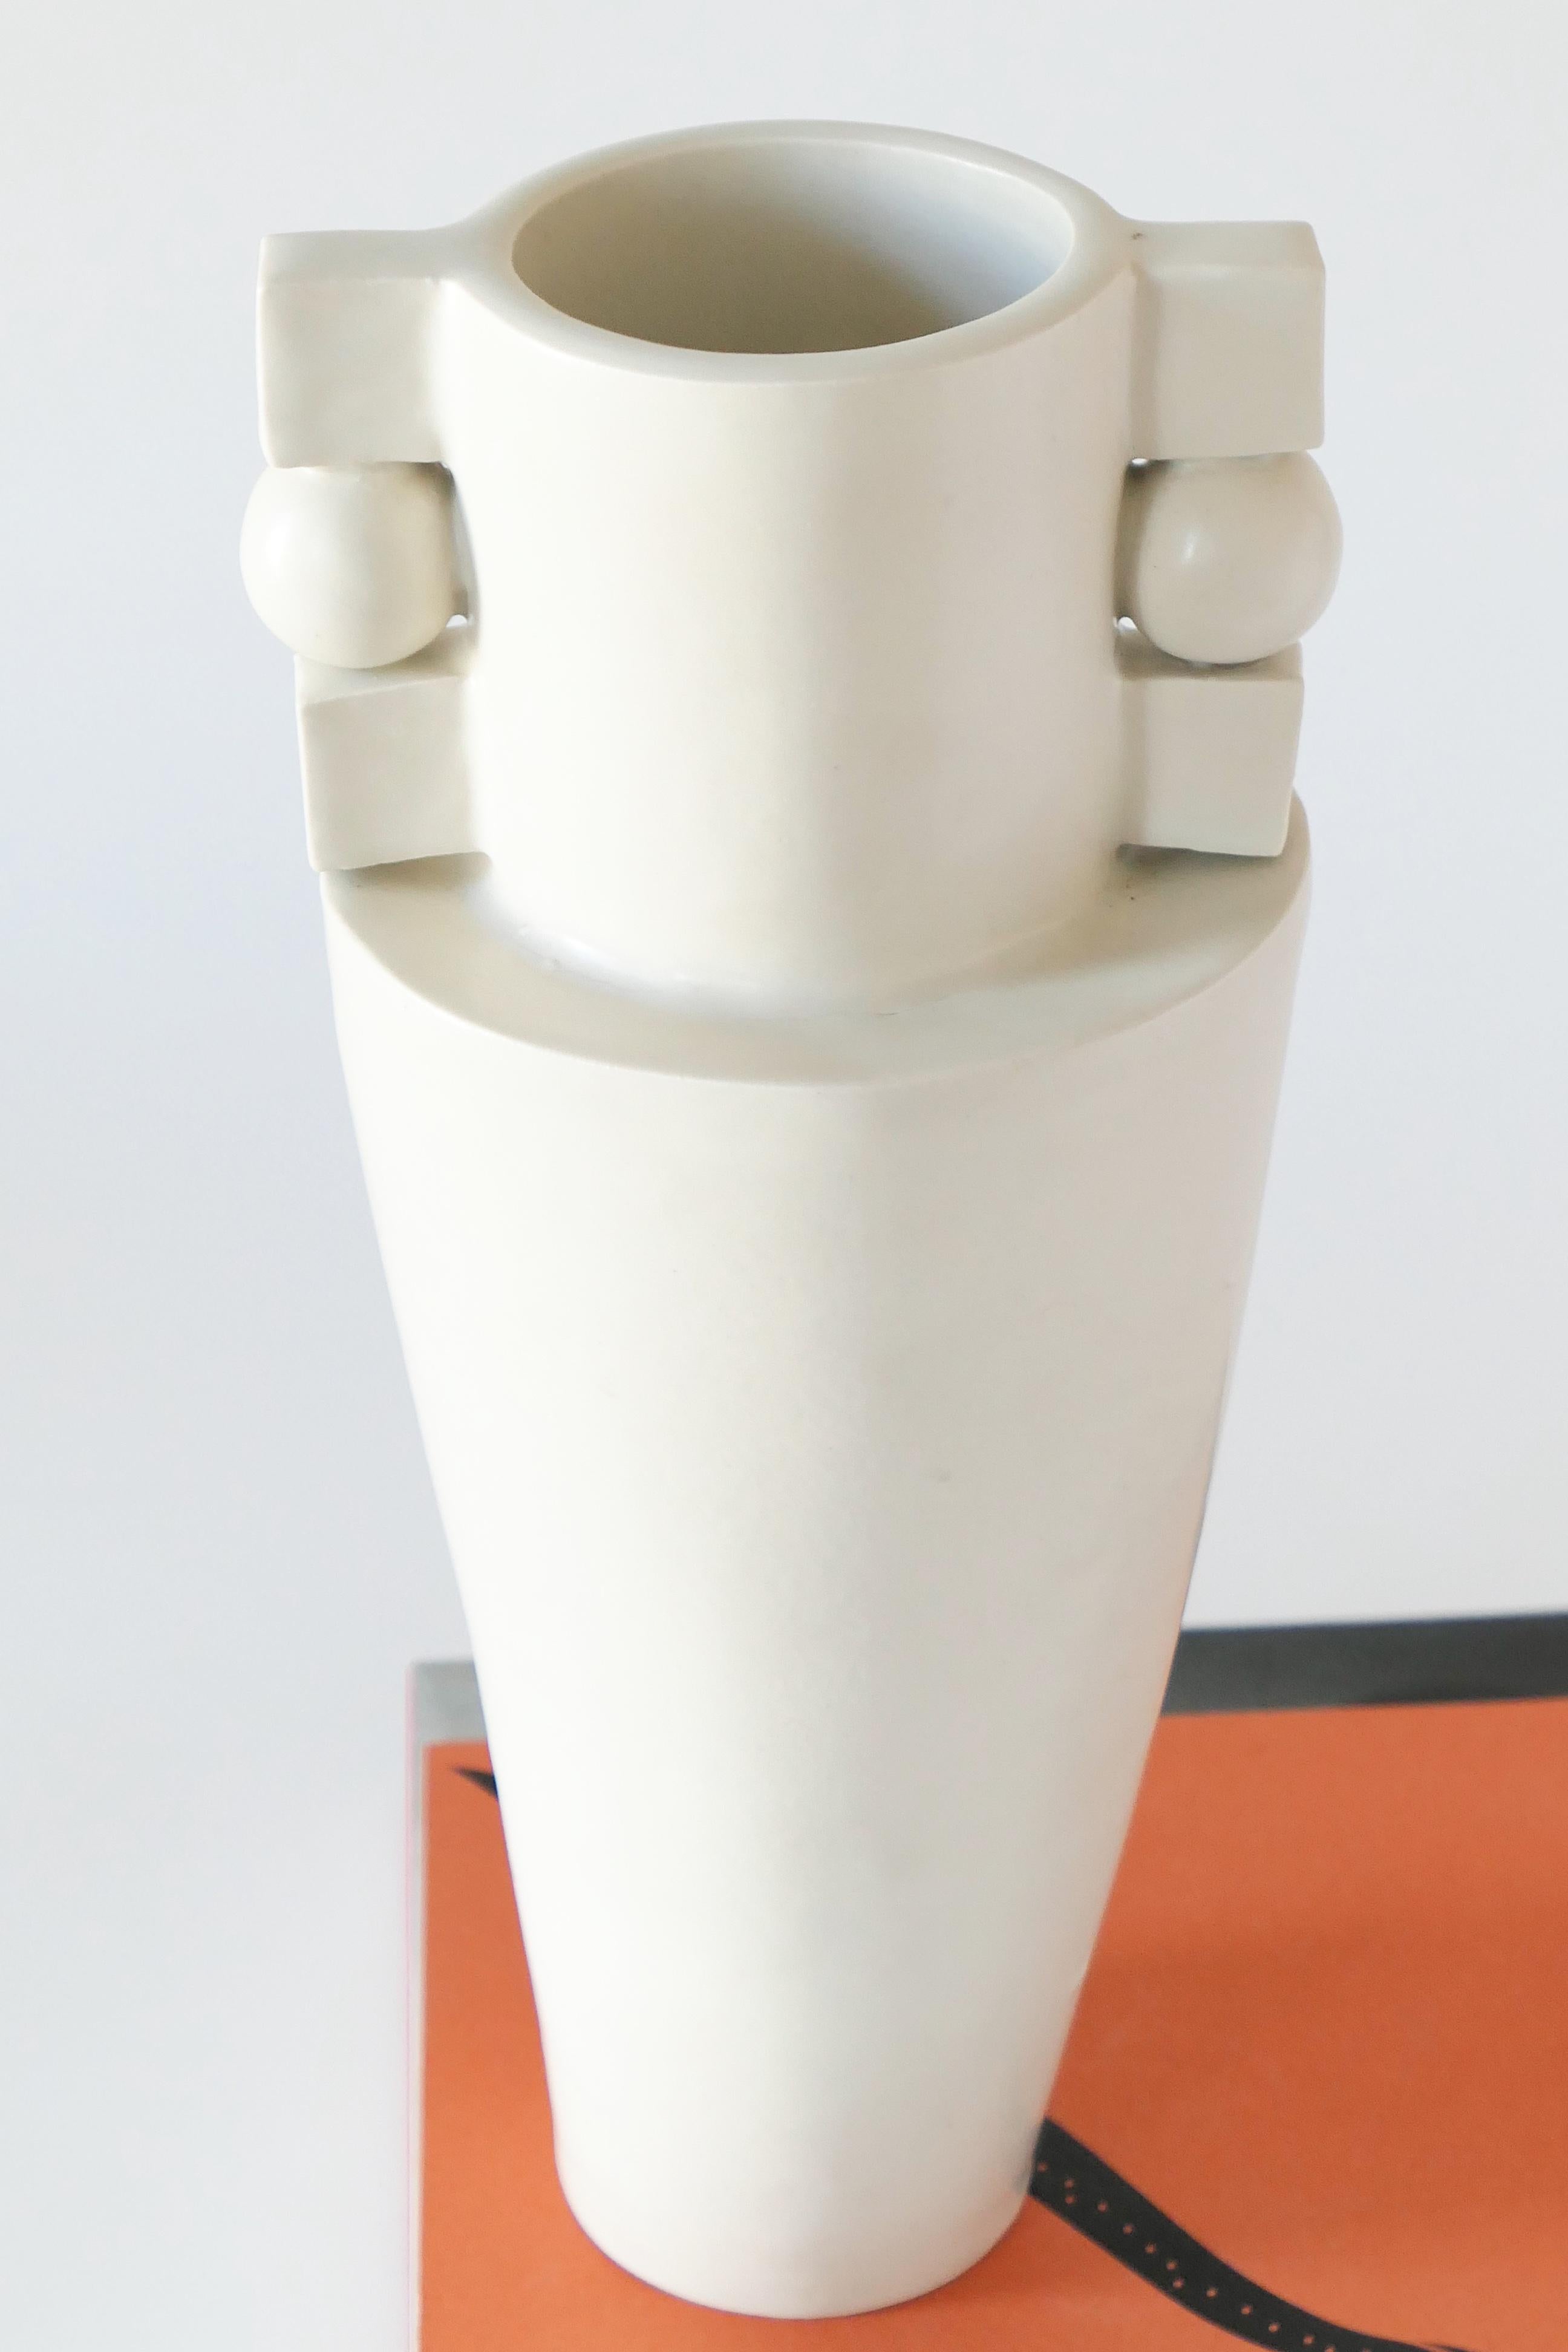 Tall off-white Bauhaus-inspired stoneware vase, finished with a soft, matte white glaze. 

Every piece is made individually and celebrates the slight imperfections intrinsic to handmade. Please note that variations may occur, as well as marks of